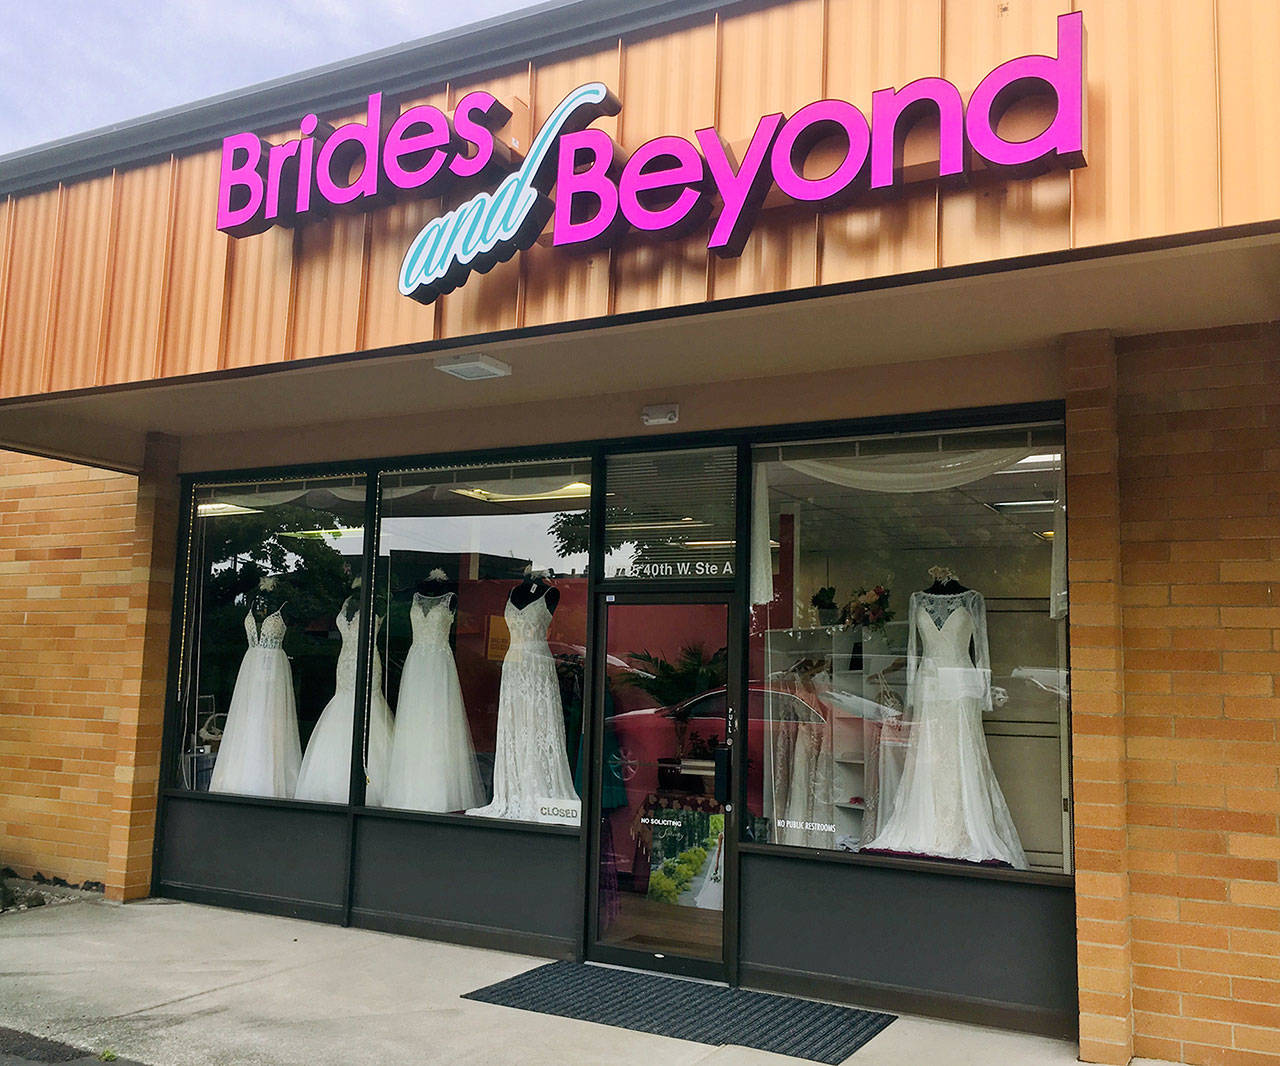 The Brides and Beyond boutique in Lynnwood on Friday, after a burglary during which dresses and customer data were stolen. (Sue Misao / The Herald)